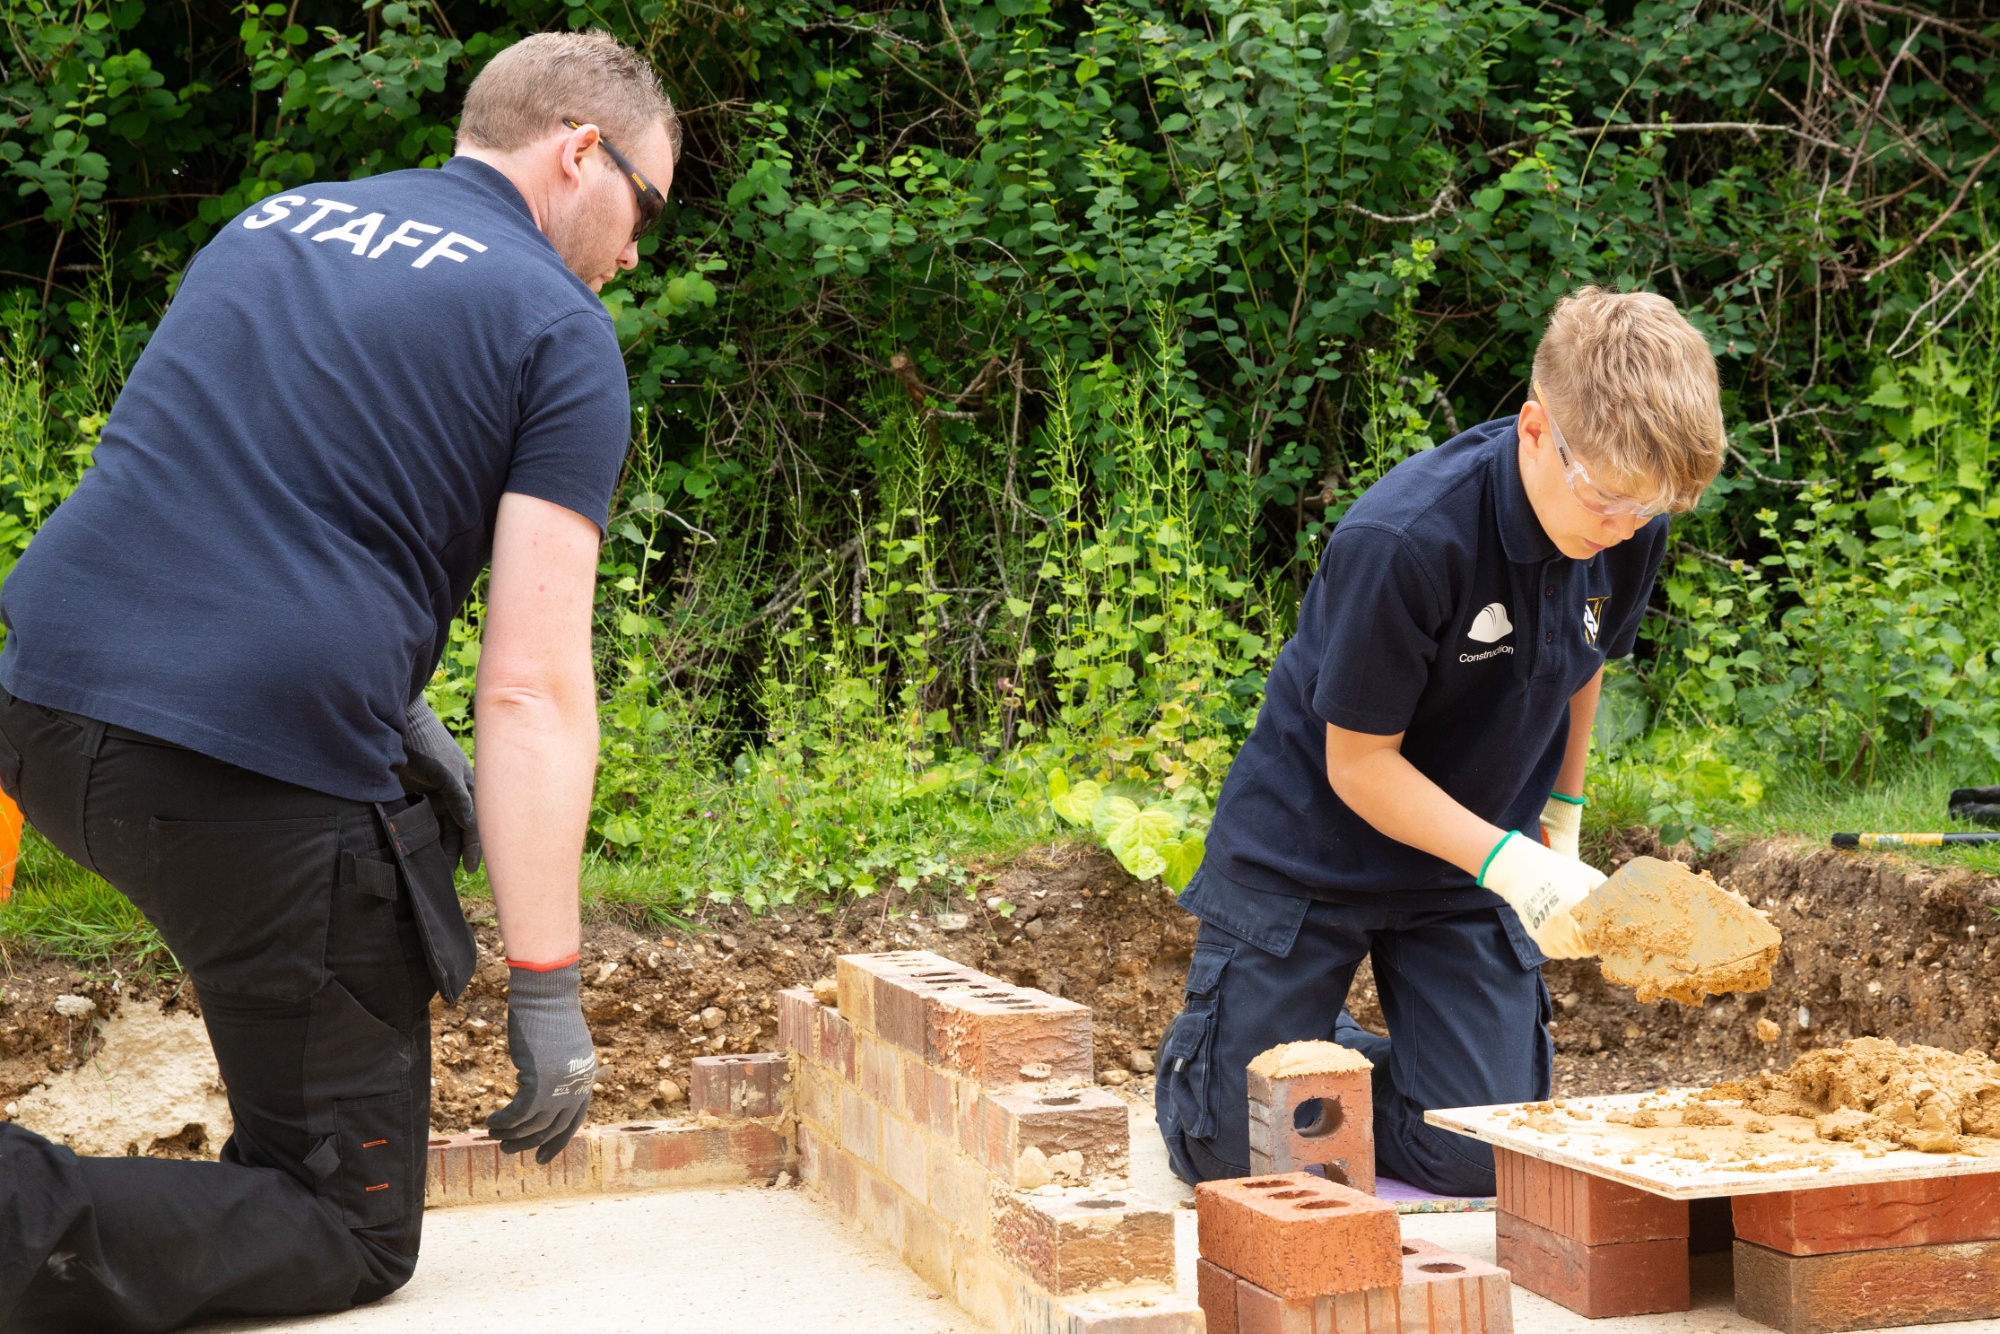 Kennet pupil bricklaying, watched by teacher